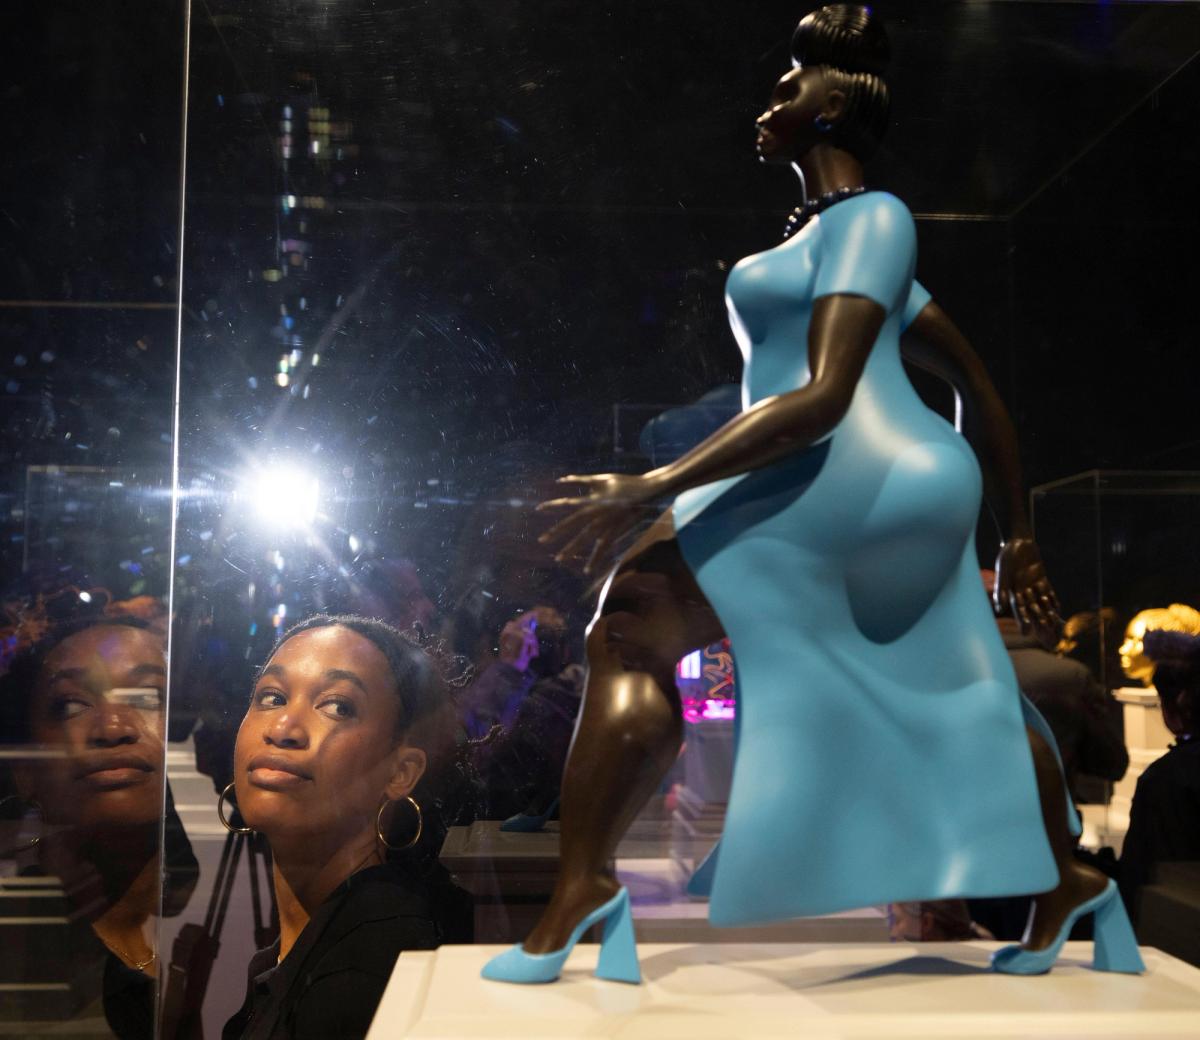 Artist Tschabalala Self in front of her proposed 2028 fourth plinth commission, Lady in Blue 

Credit: Malcolm Park/Alamy Live News